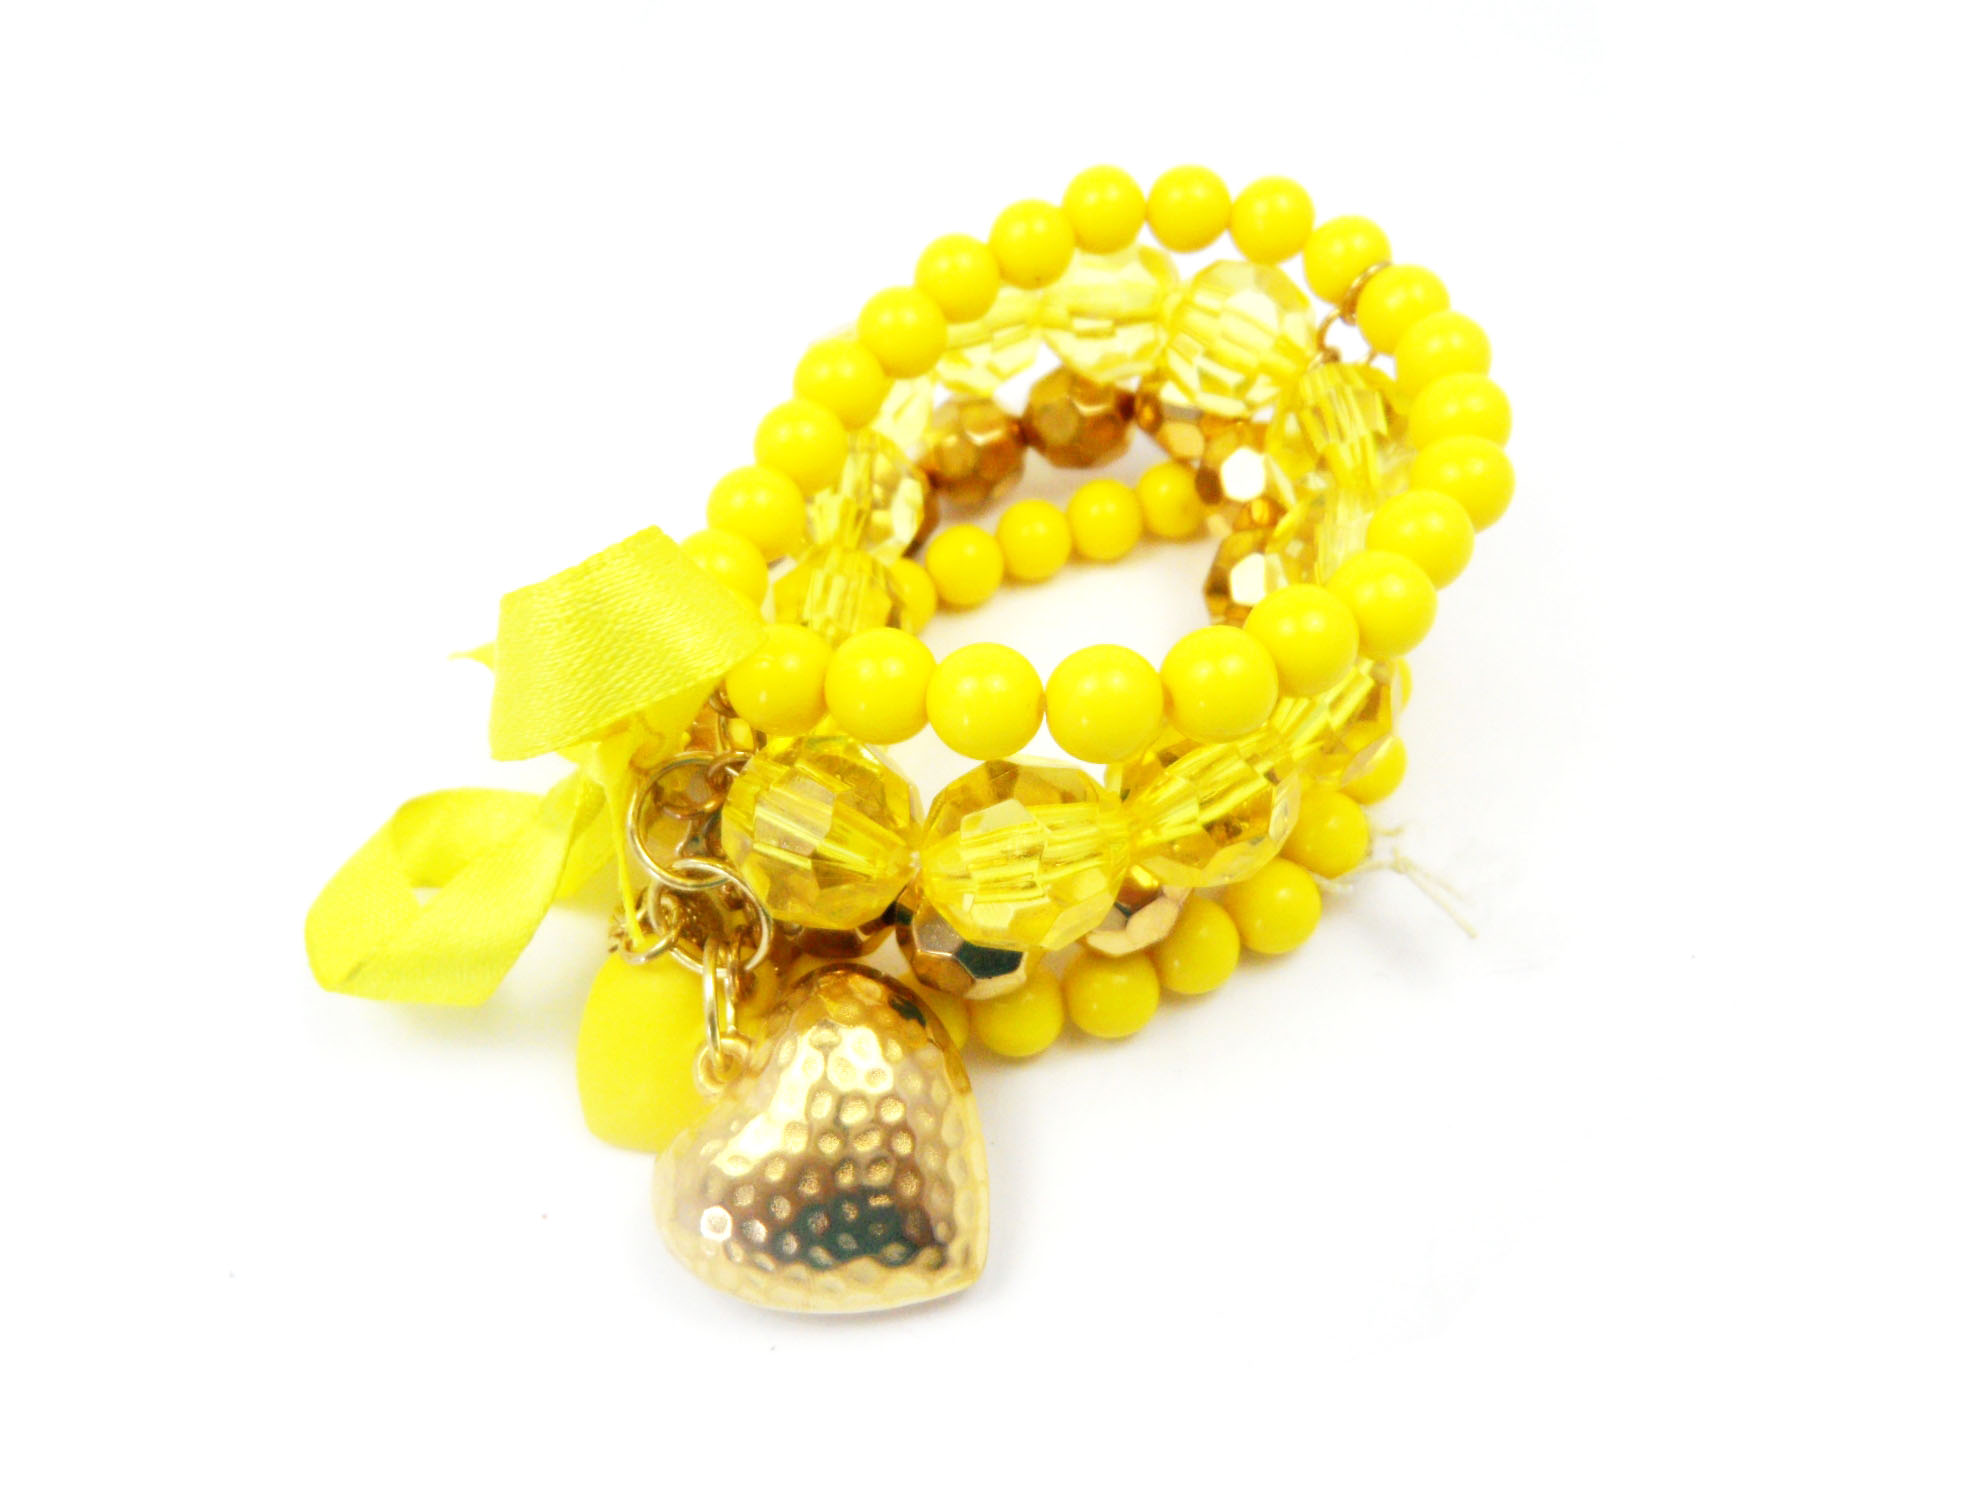 Fashion jewelry made of ccb and plastic,available in various designs